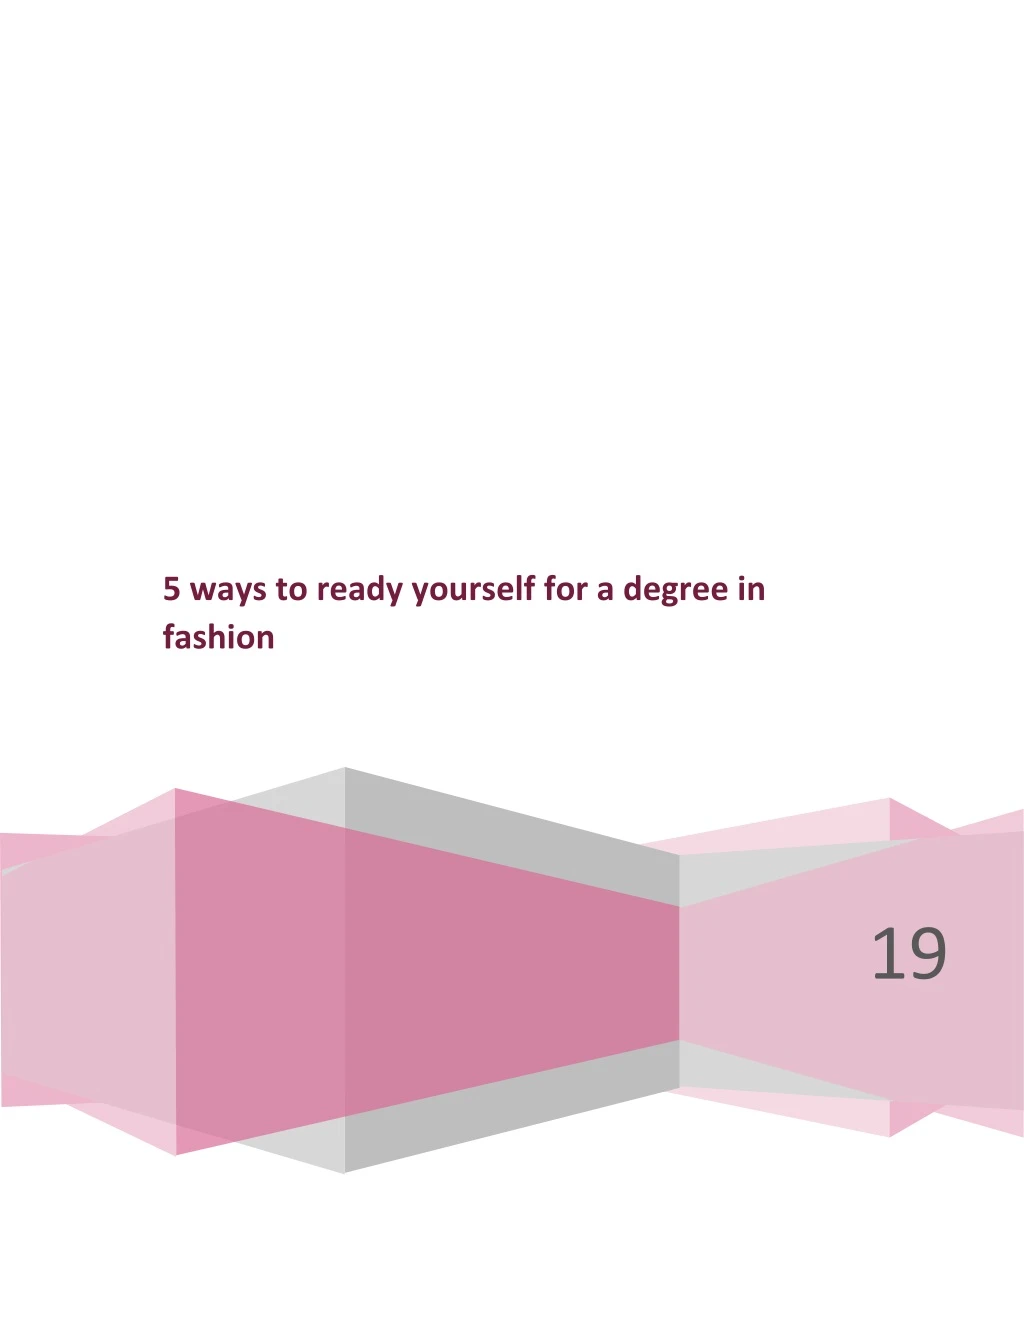 5 ways to ready yourself for a degree in fashion